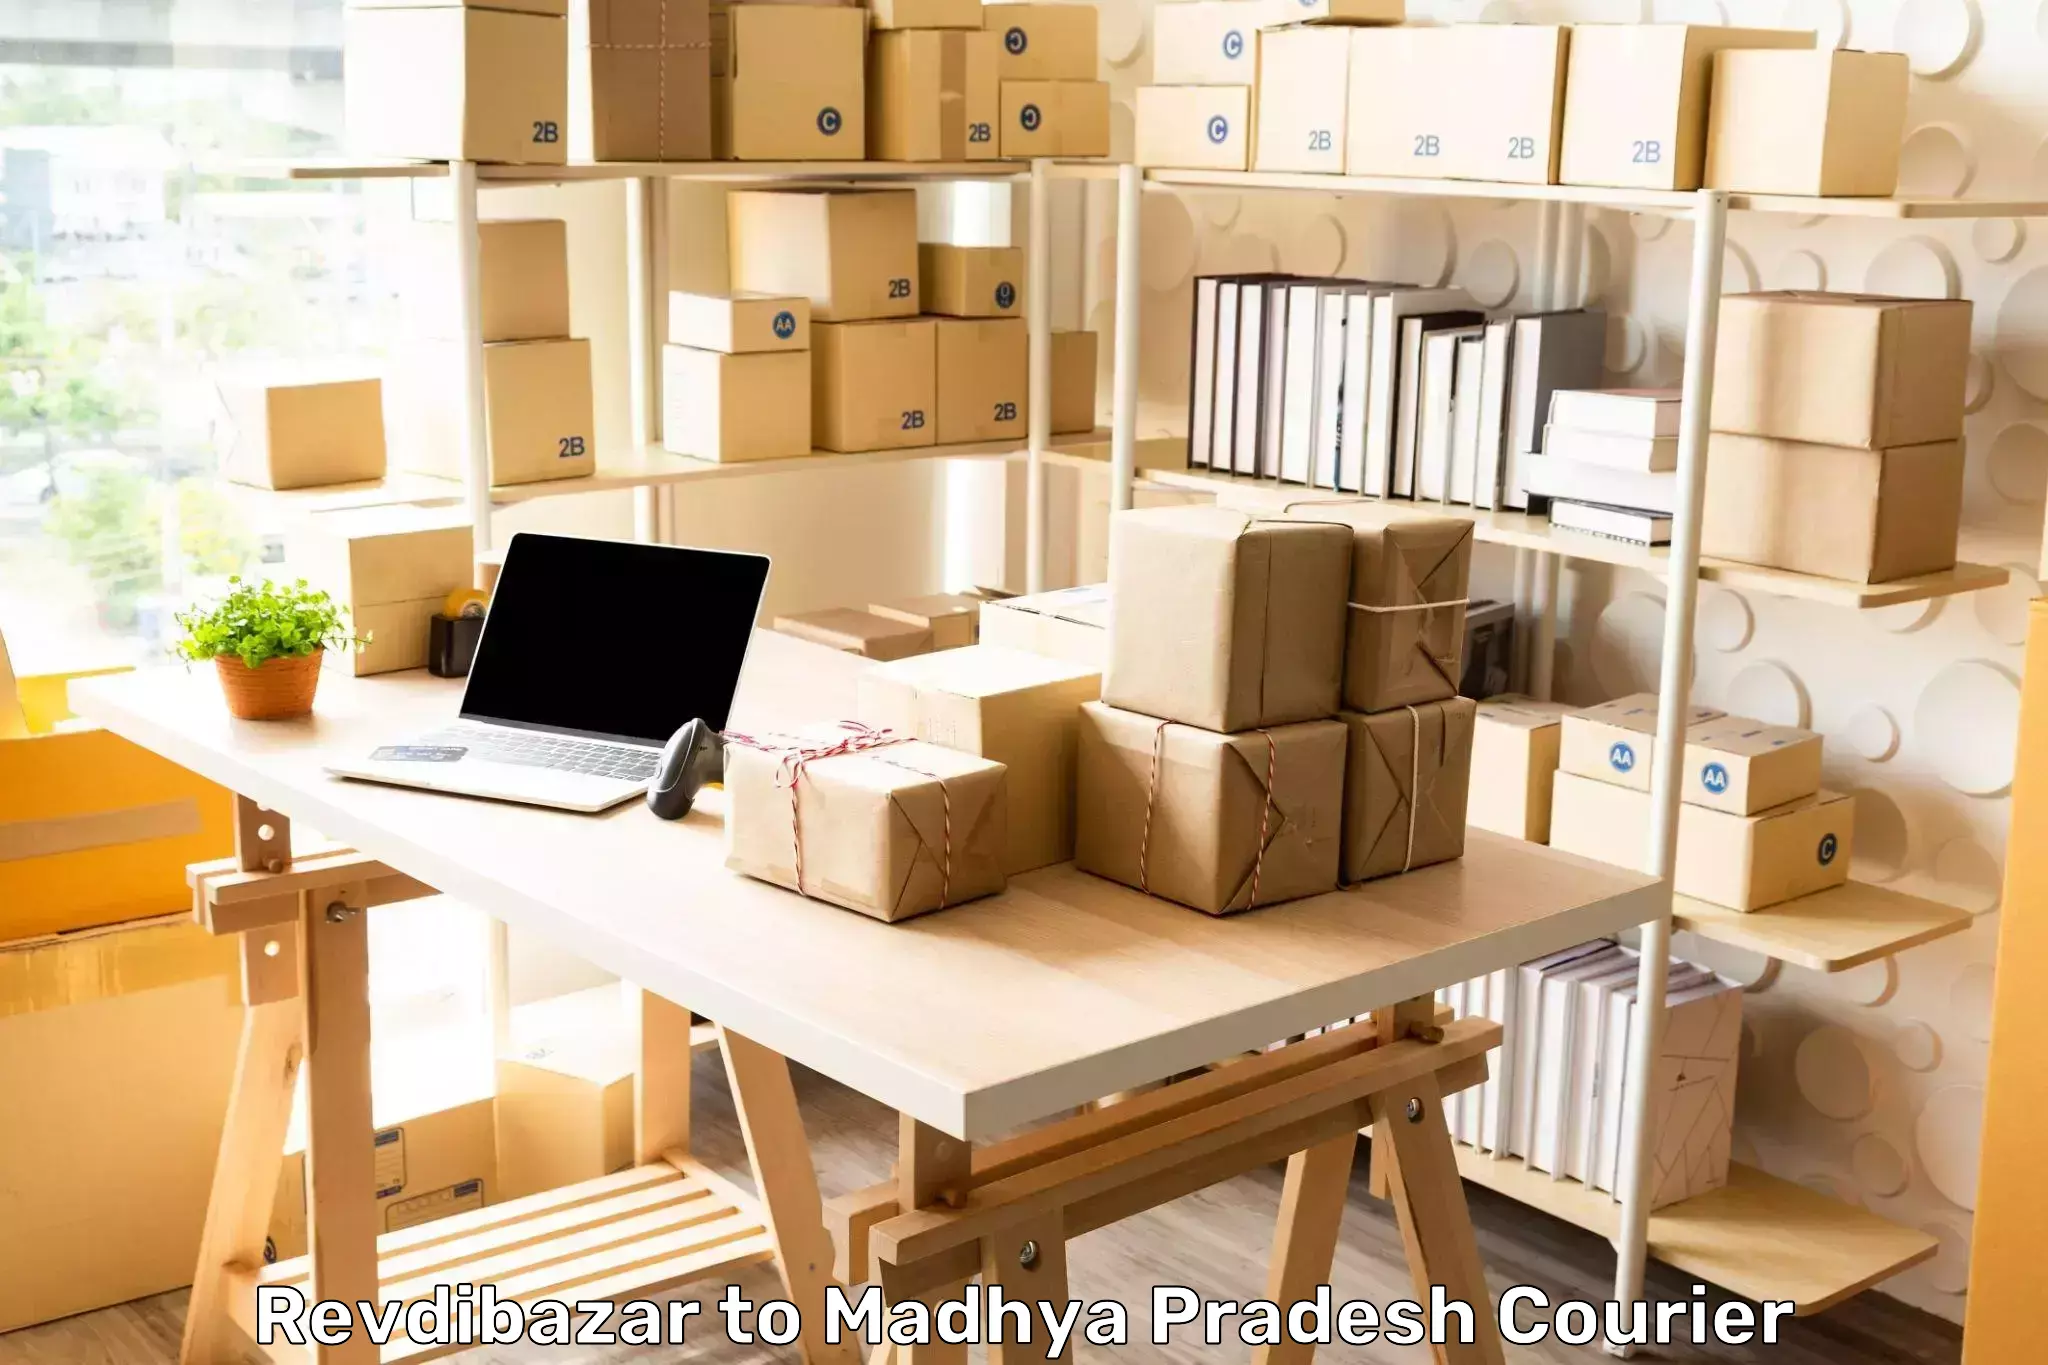 Courier service efficiency Revdibazar to Jawad Neemuch